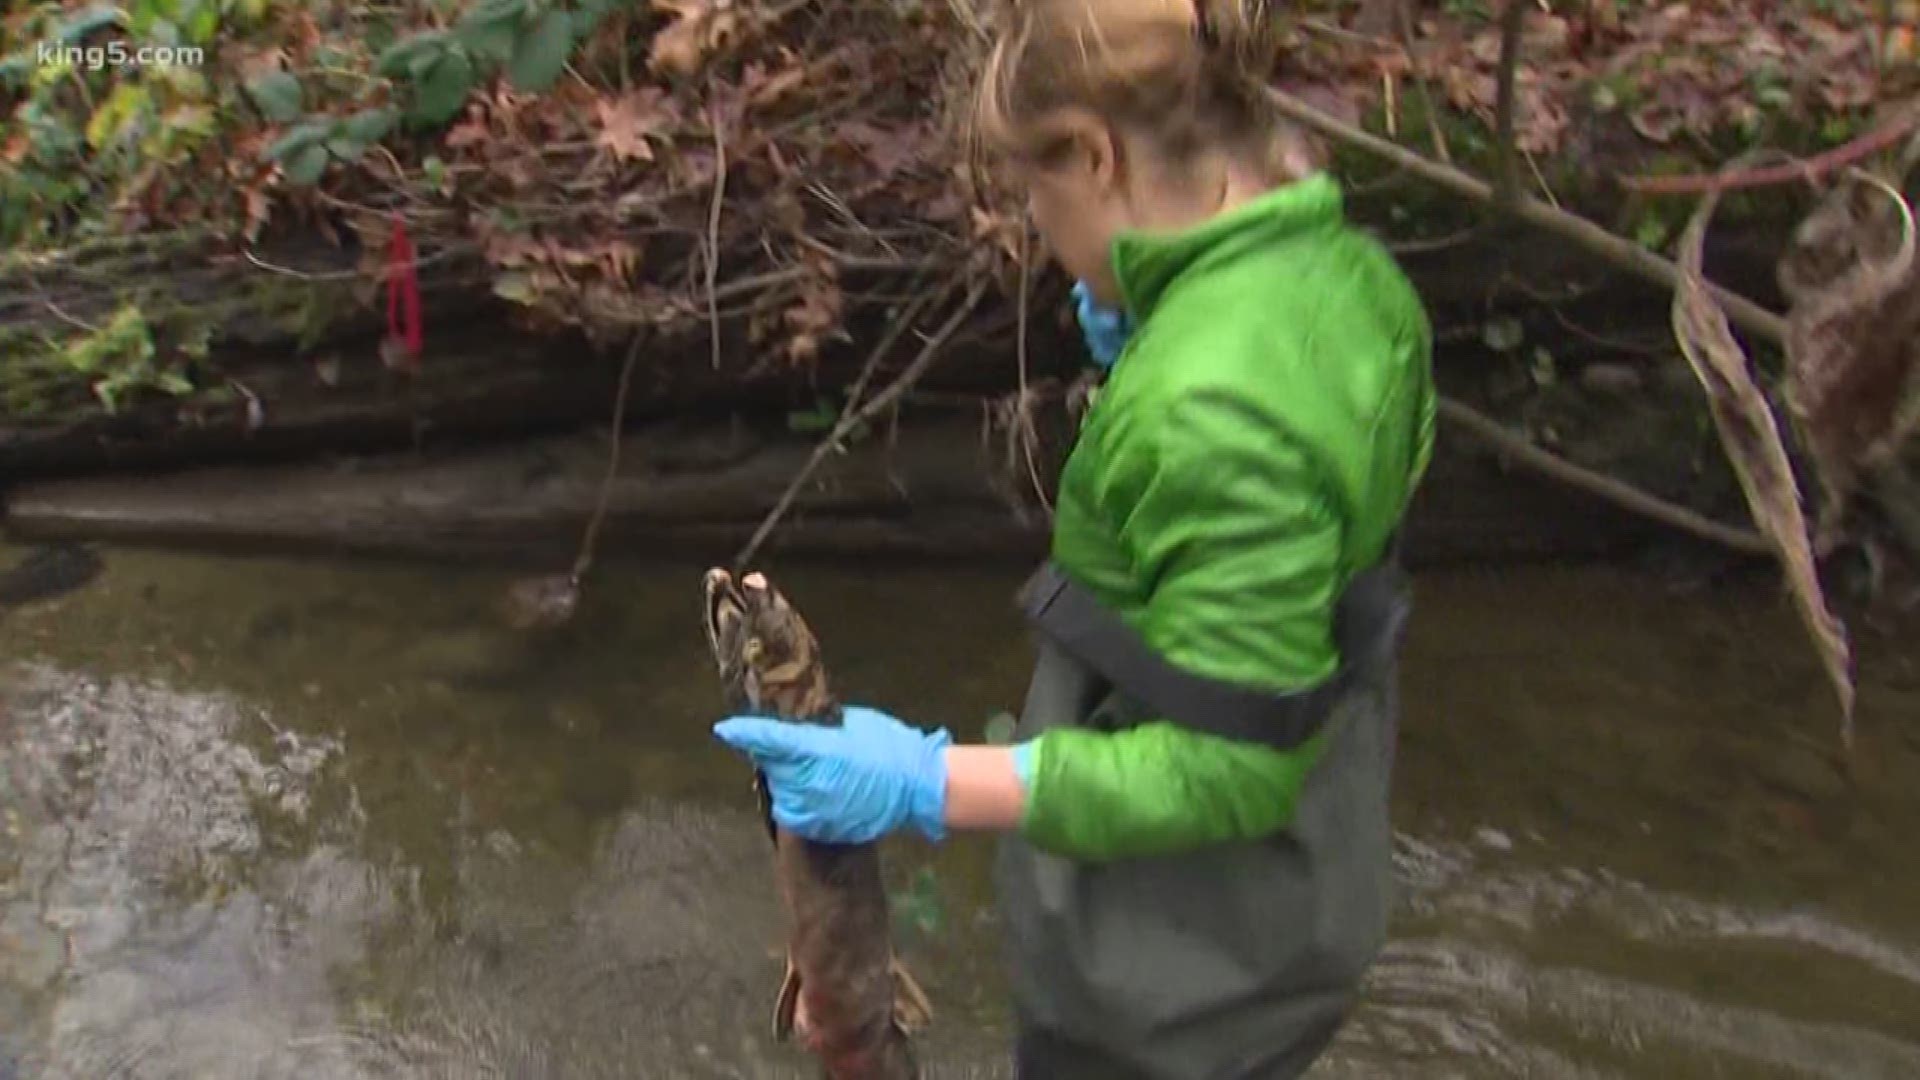 Crews are monitoring local streams to see how all of the salt used to clear snowy roads will affect salmon. KING 5 Environmental Reporter Alison Morrow traveled to one of Seattle's most polluted creeks to show us the biggest concerns.